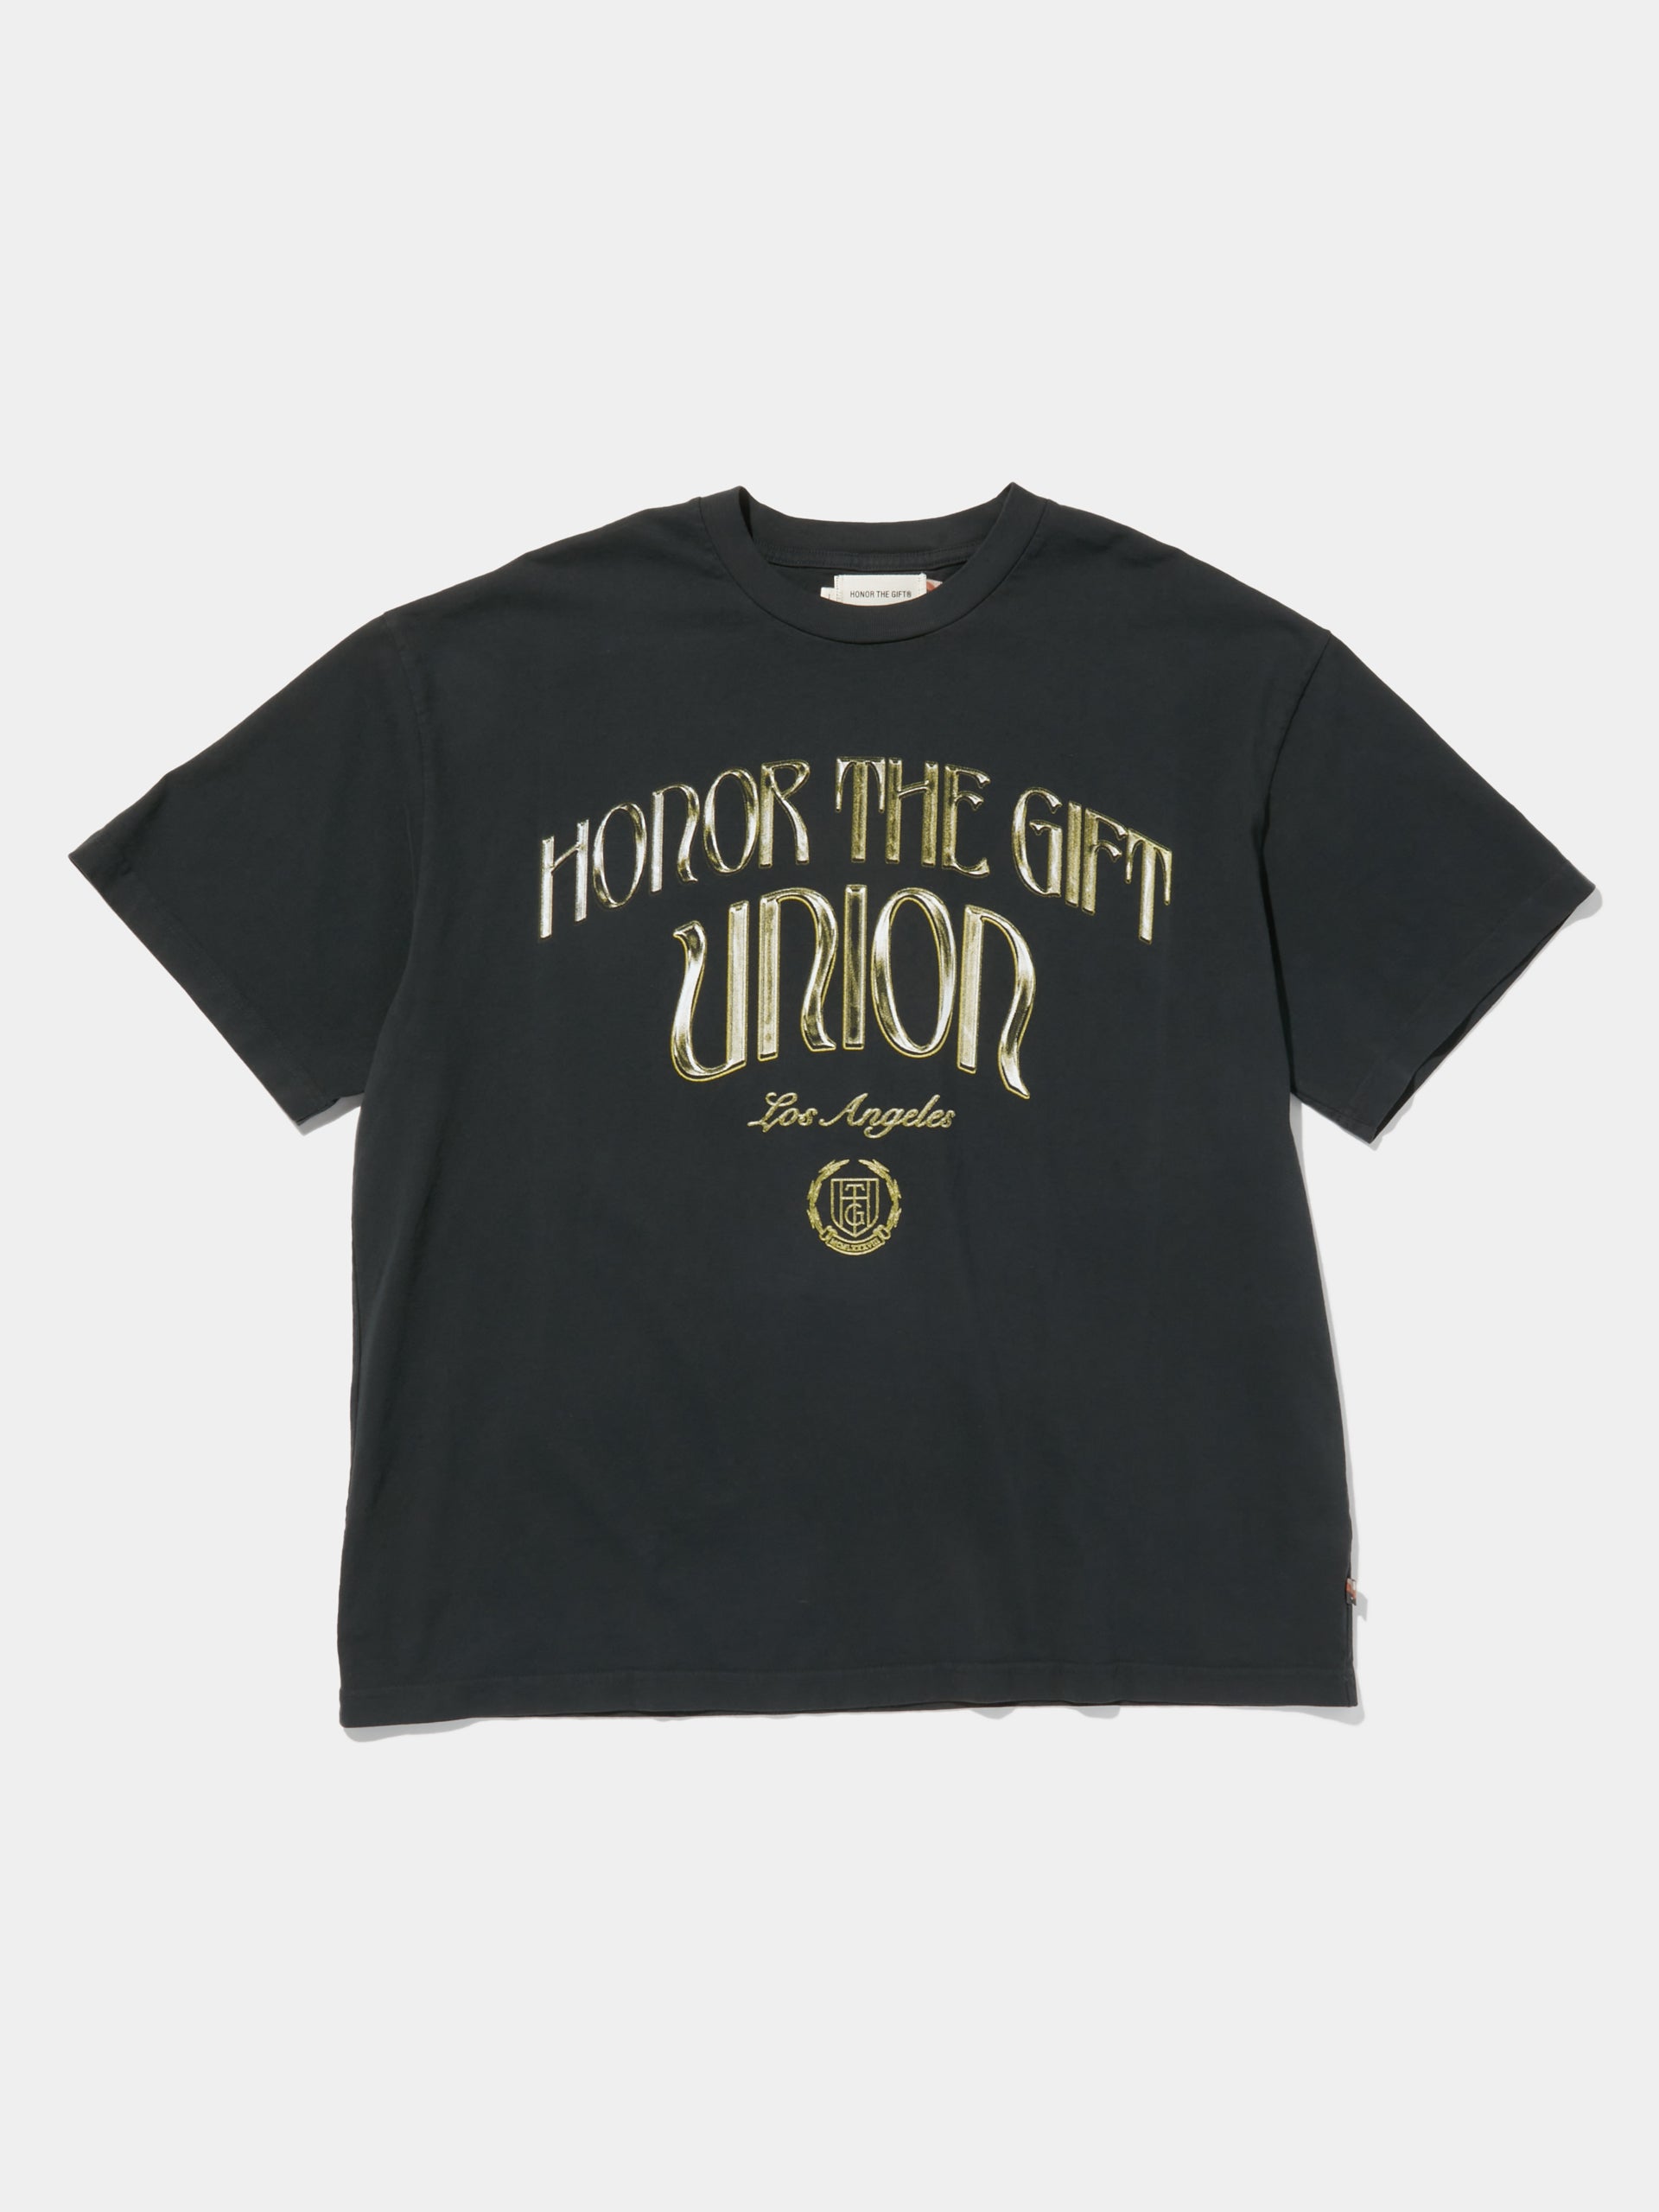 Buy Honor The Gift HTG x UNION TEE (Black) Online at UNION LOS ANGELES